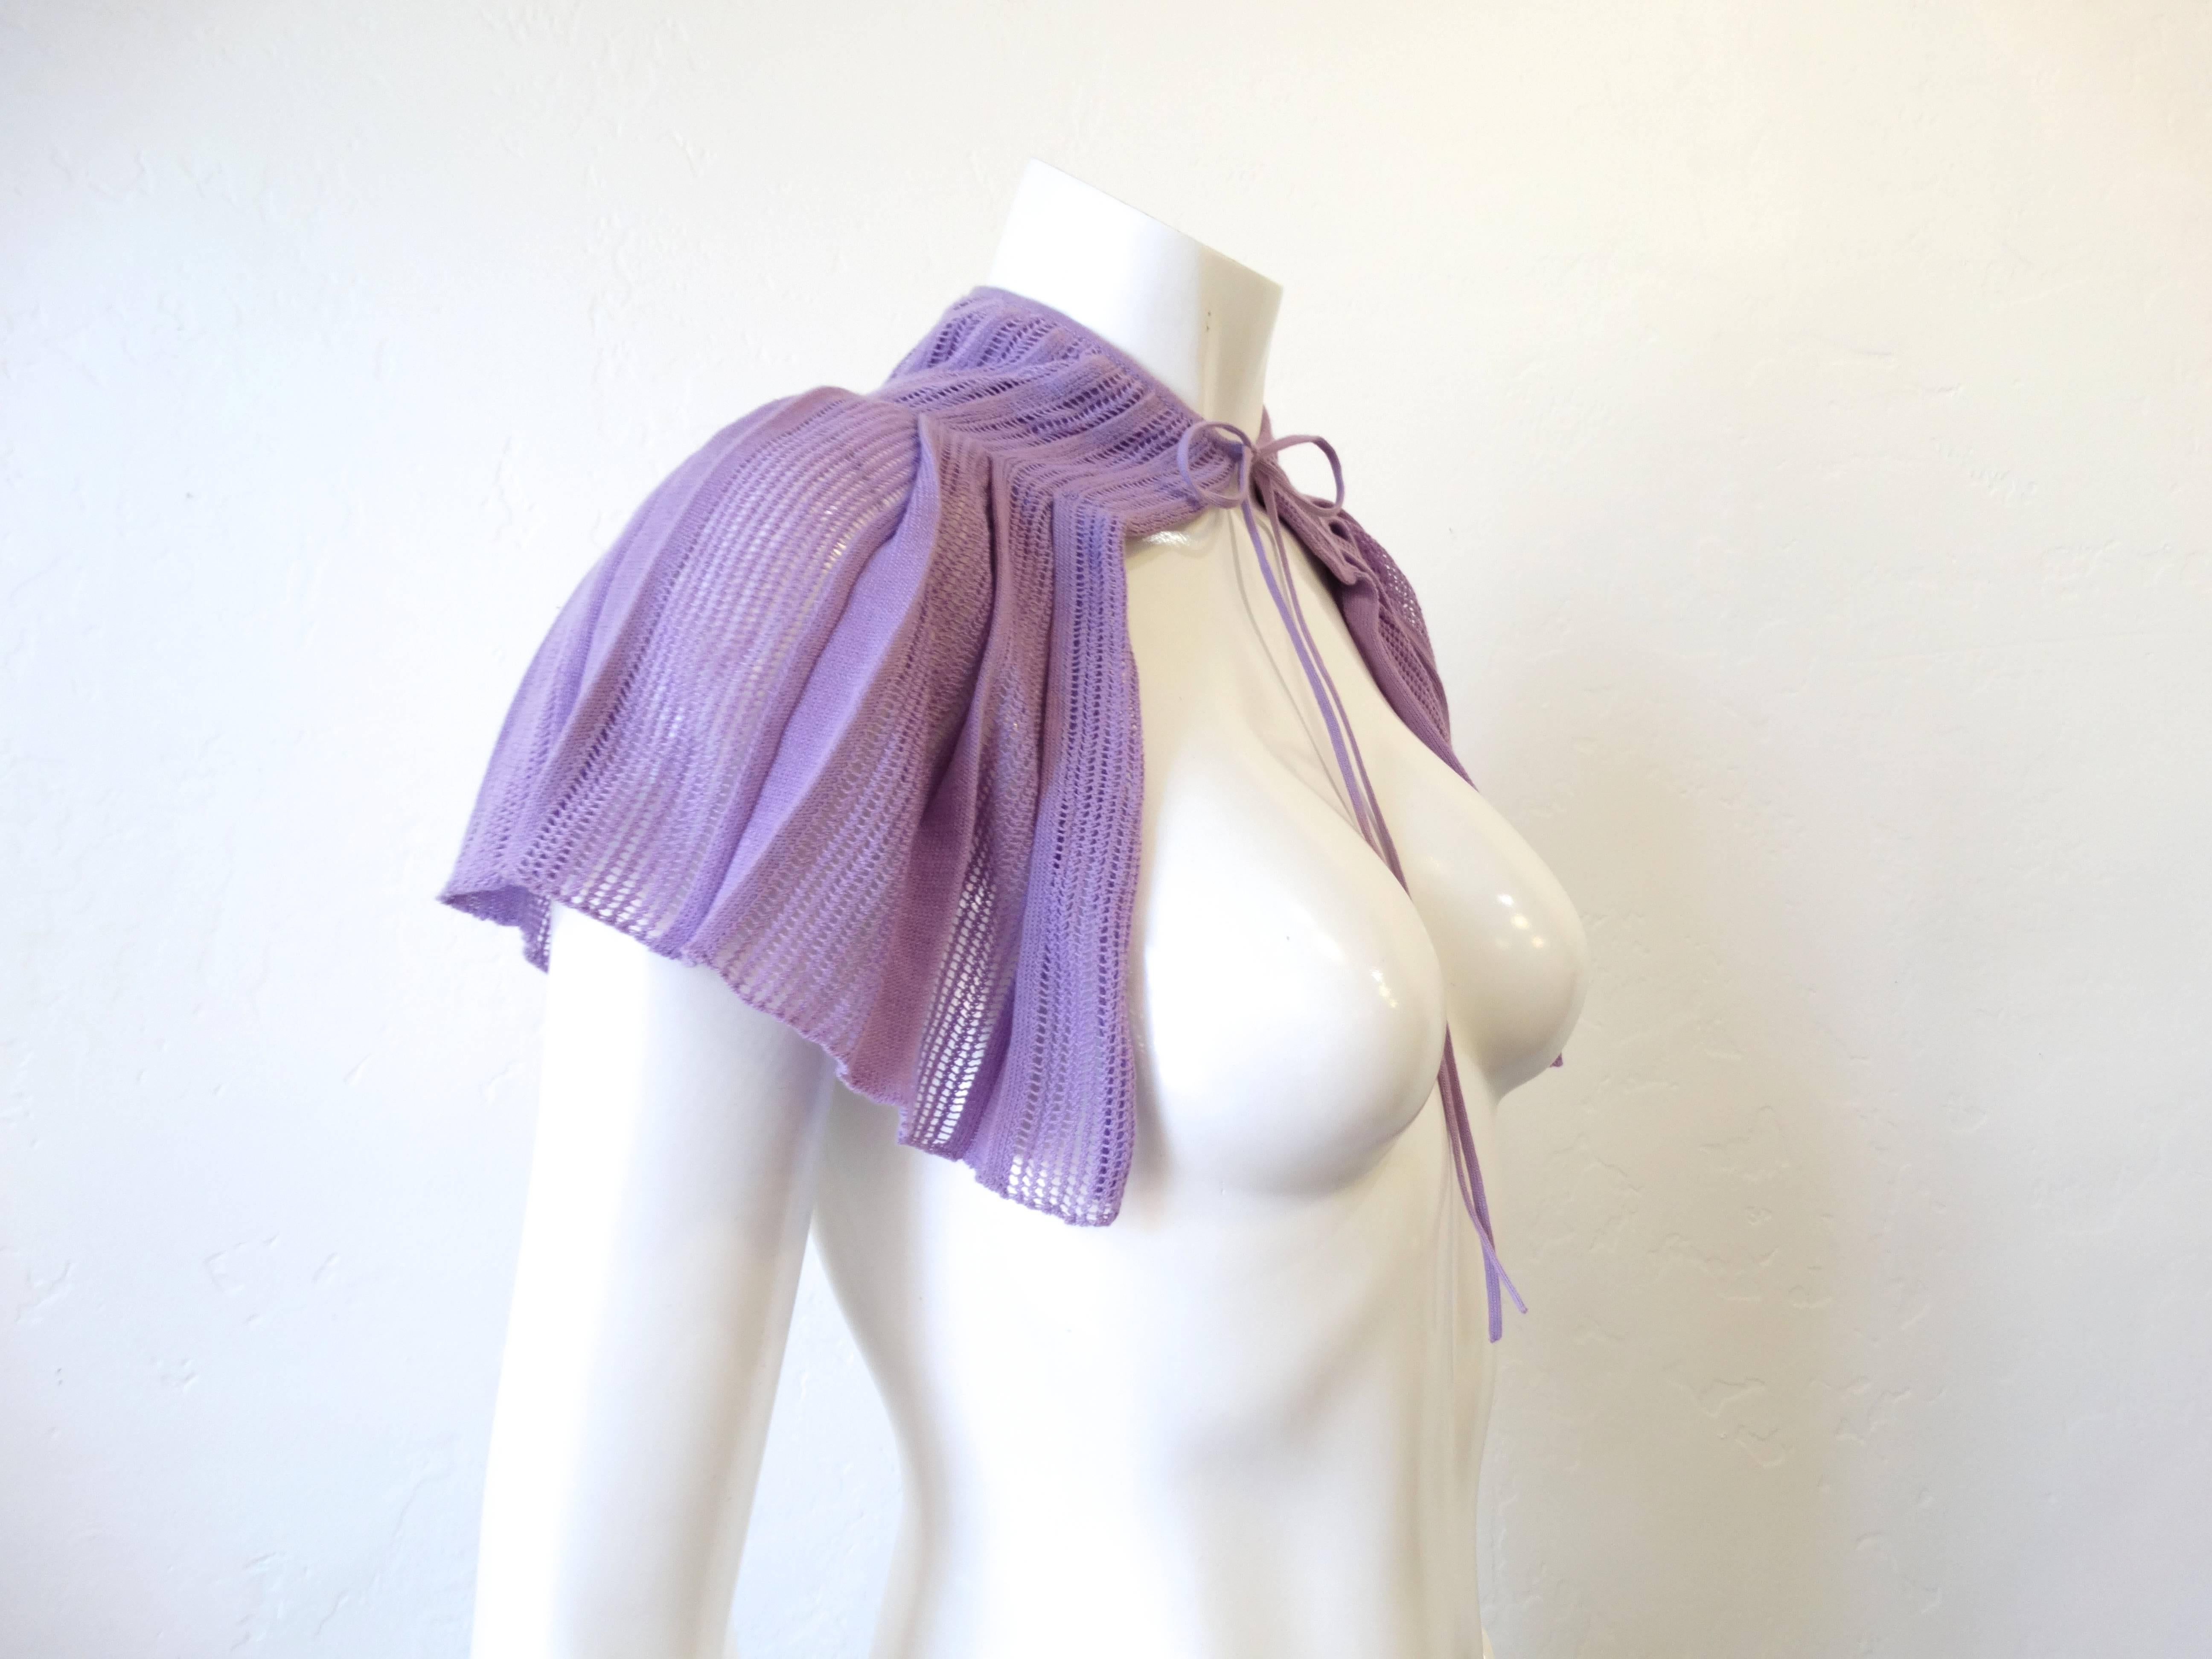 Adorable little Chanel knit capelet! Ties around the neck in a bow, lays over the shoulders perfectly. Soft lavender knit with pleated construction. Marked a size 38 though it would fit most small frames. 

Length: 12 in 